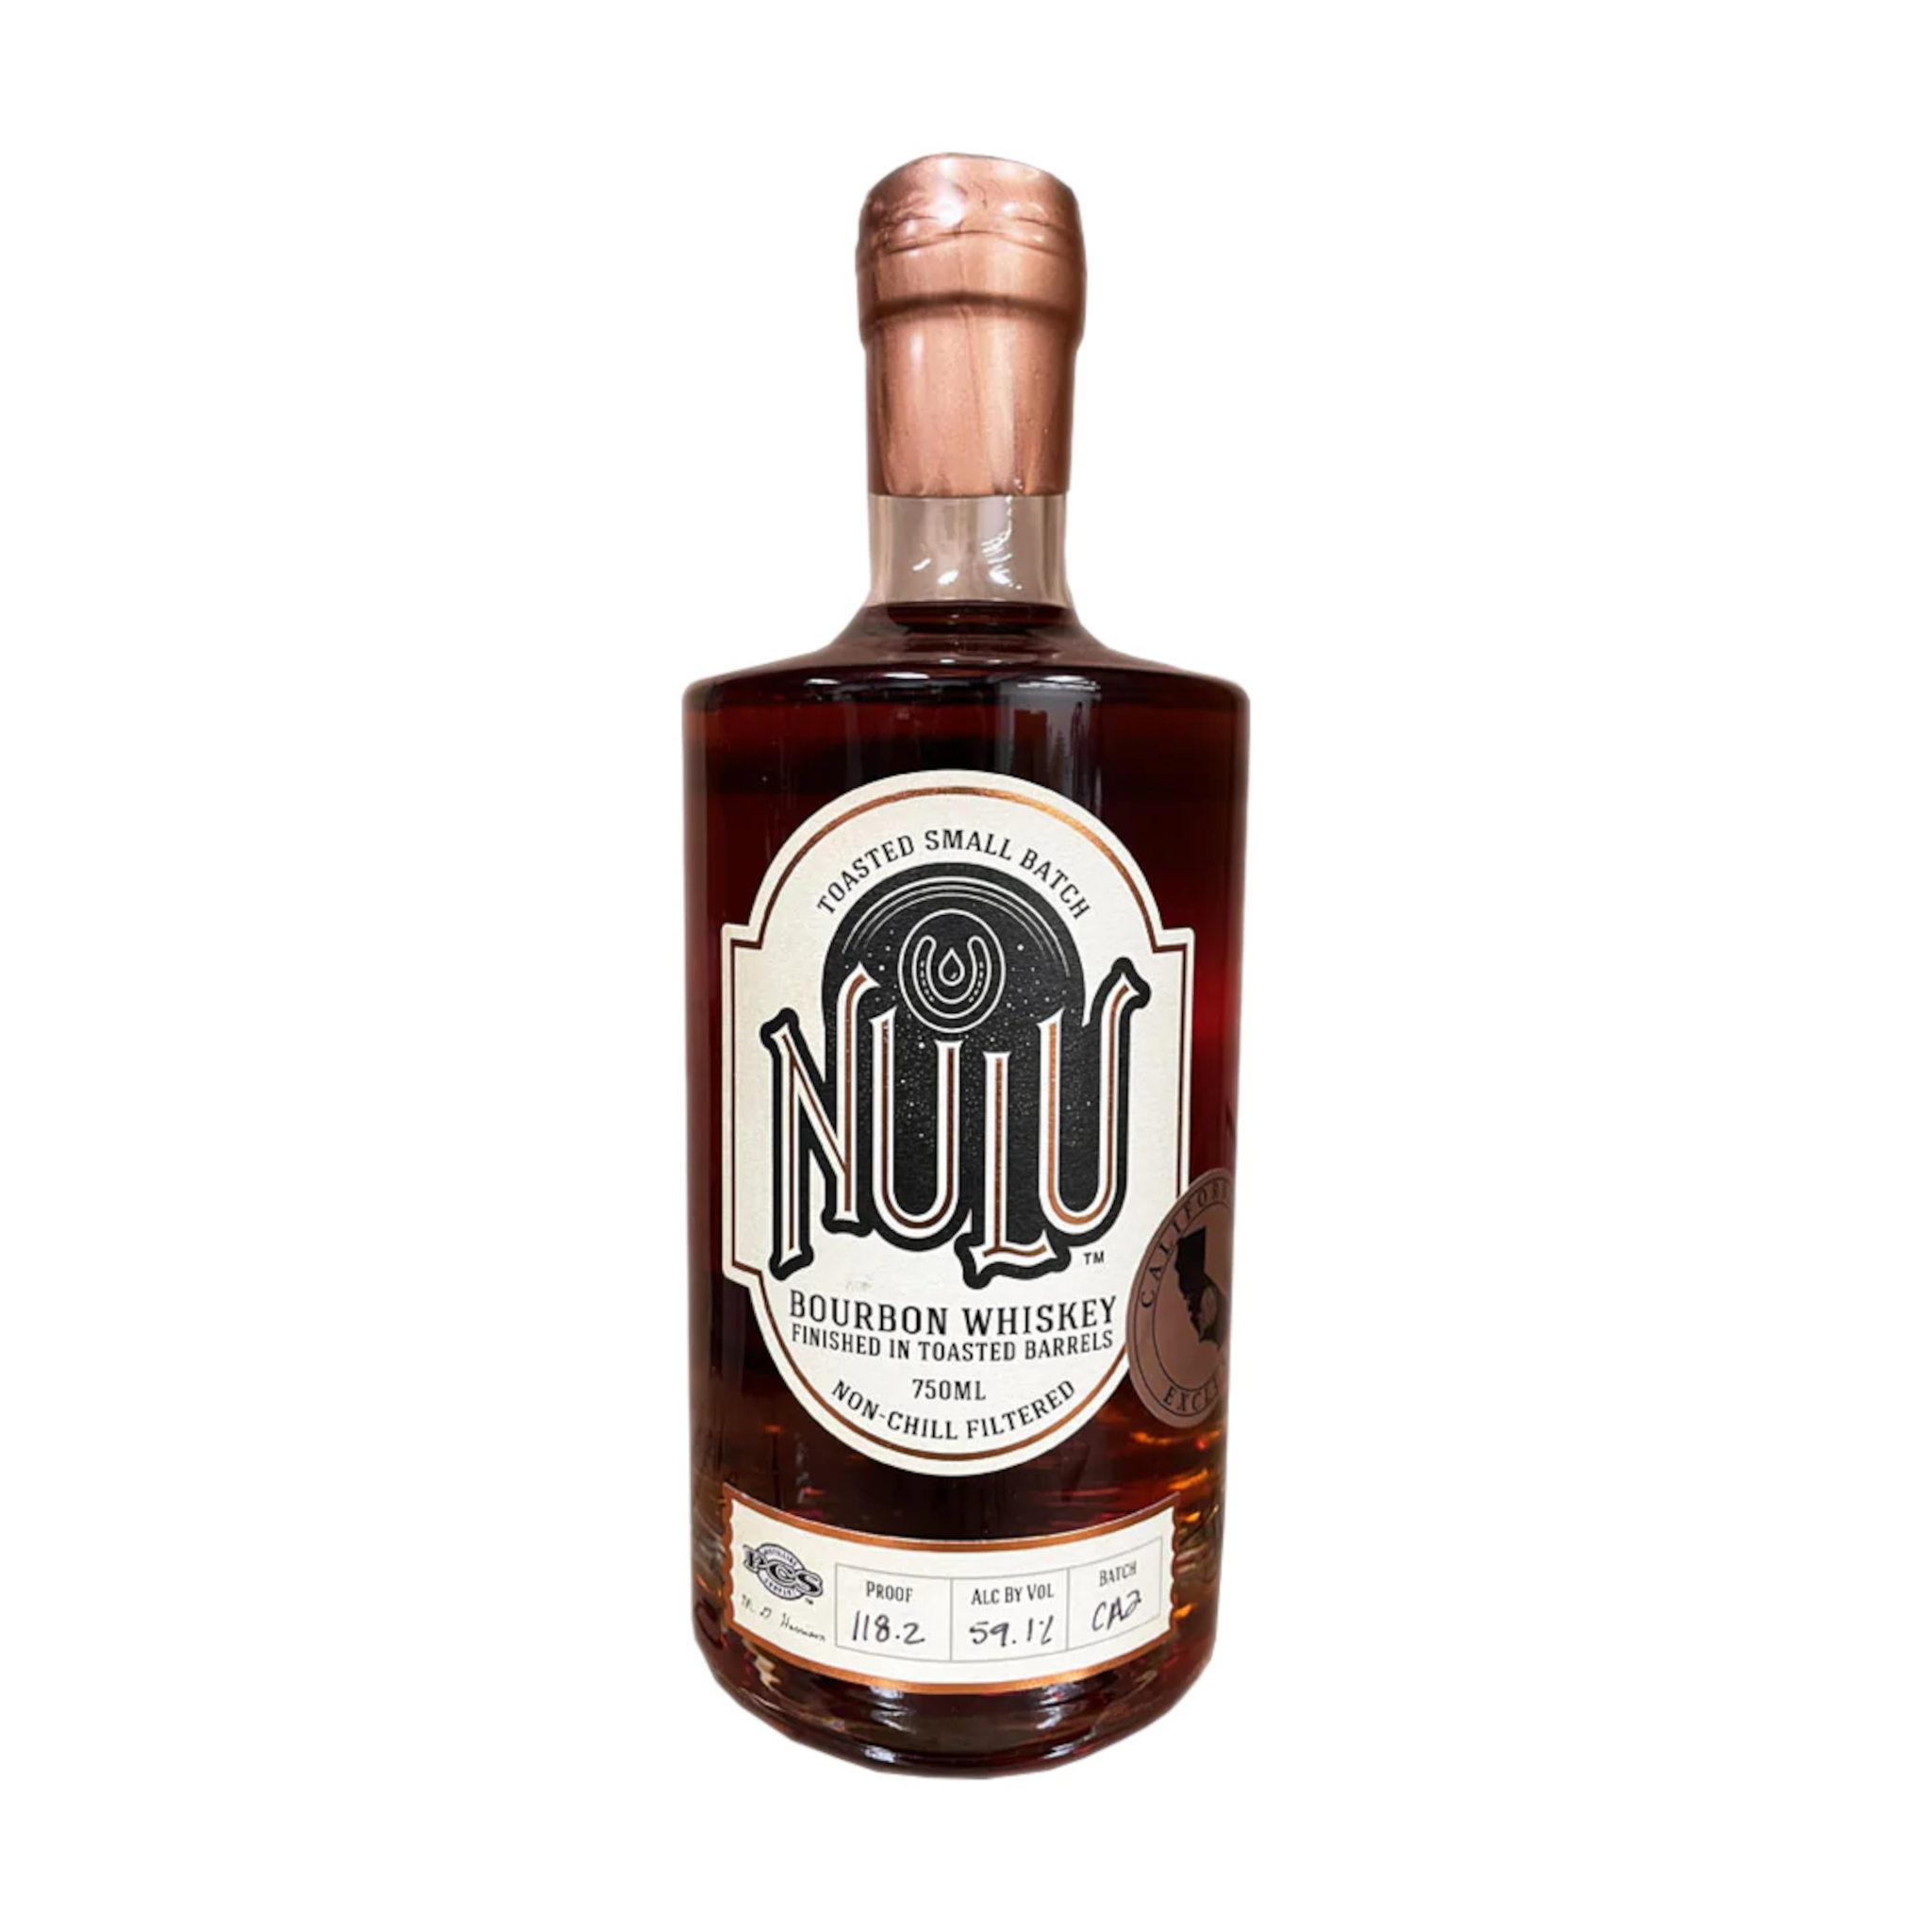 Nulu Toasted Bourbon Small Batch “California Exclusive"